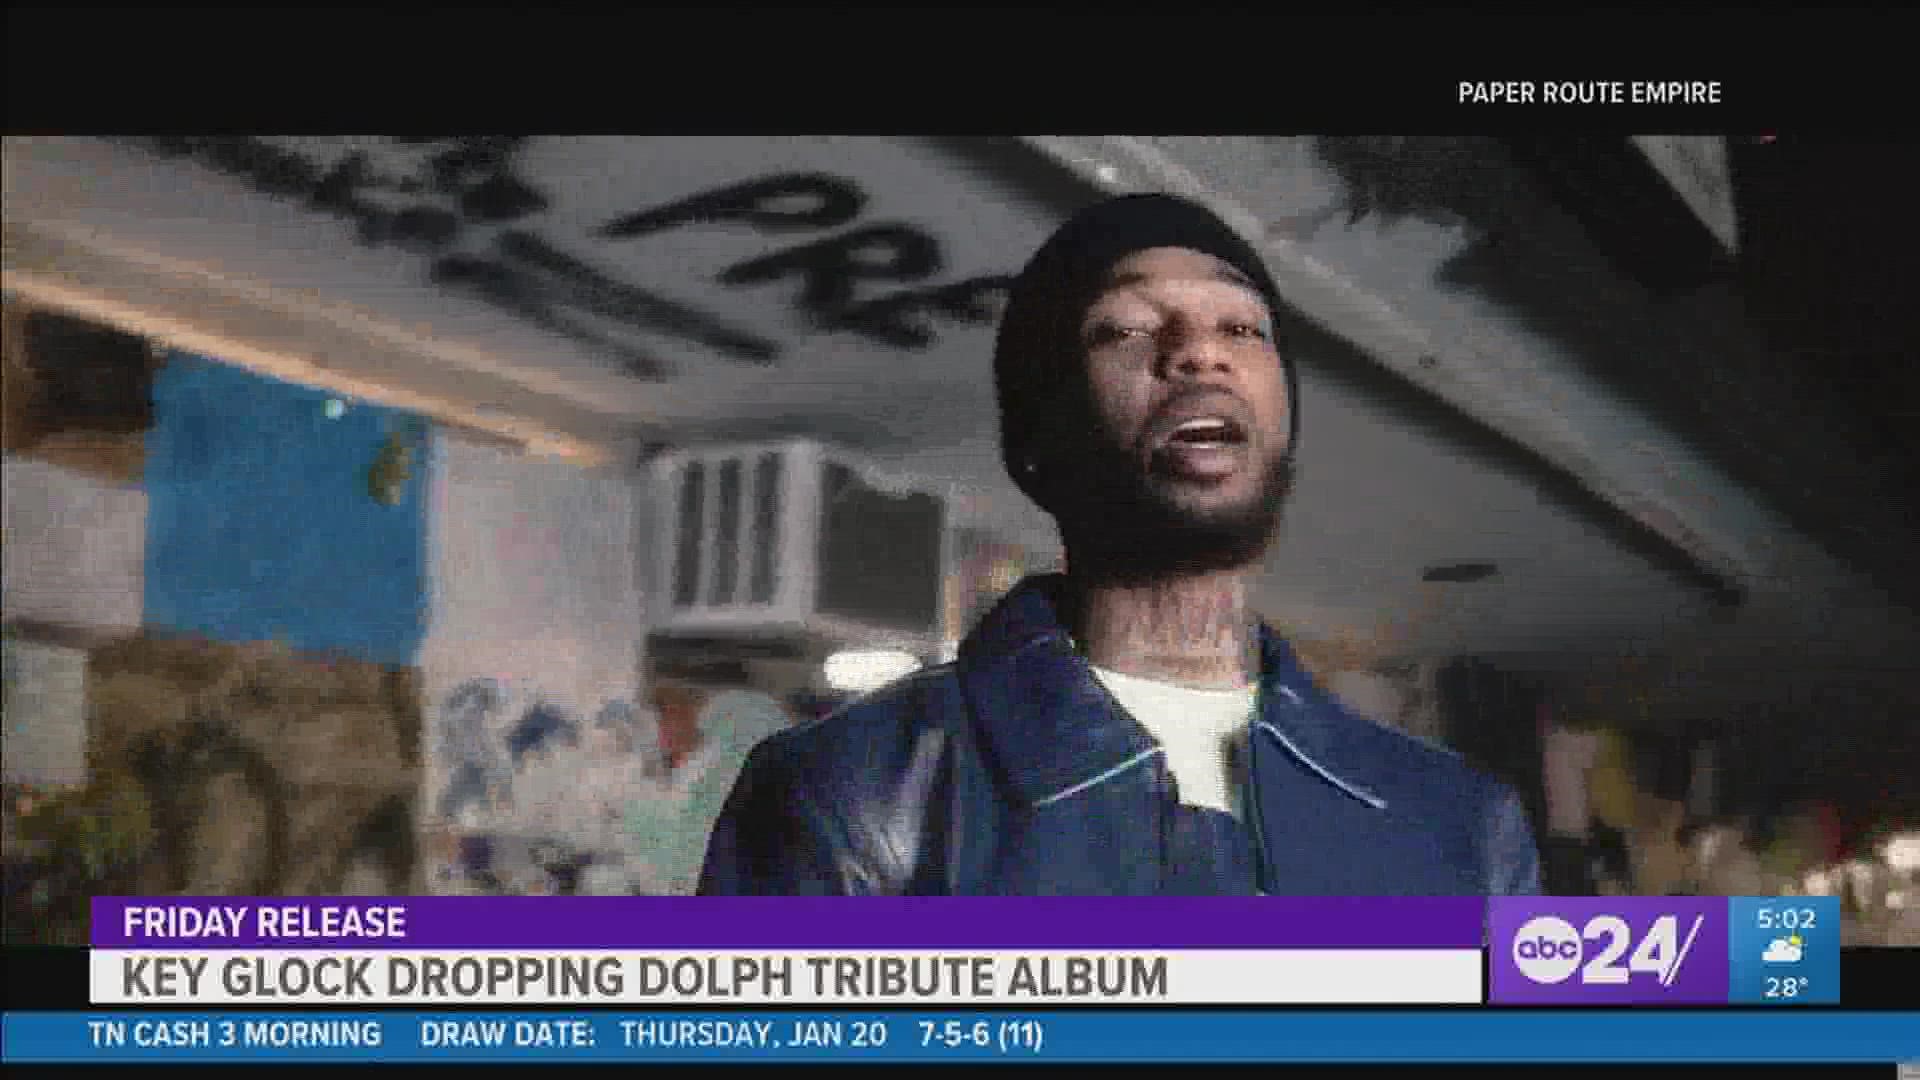 Key Glock isn't the only rapper in the music game missing Young Dolph's flare. Gucci Mane released a song about 4 weeks ago called "Long Live Dolph".